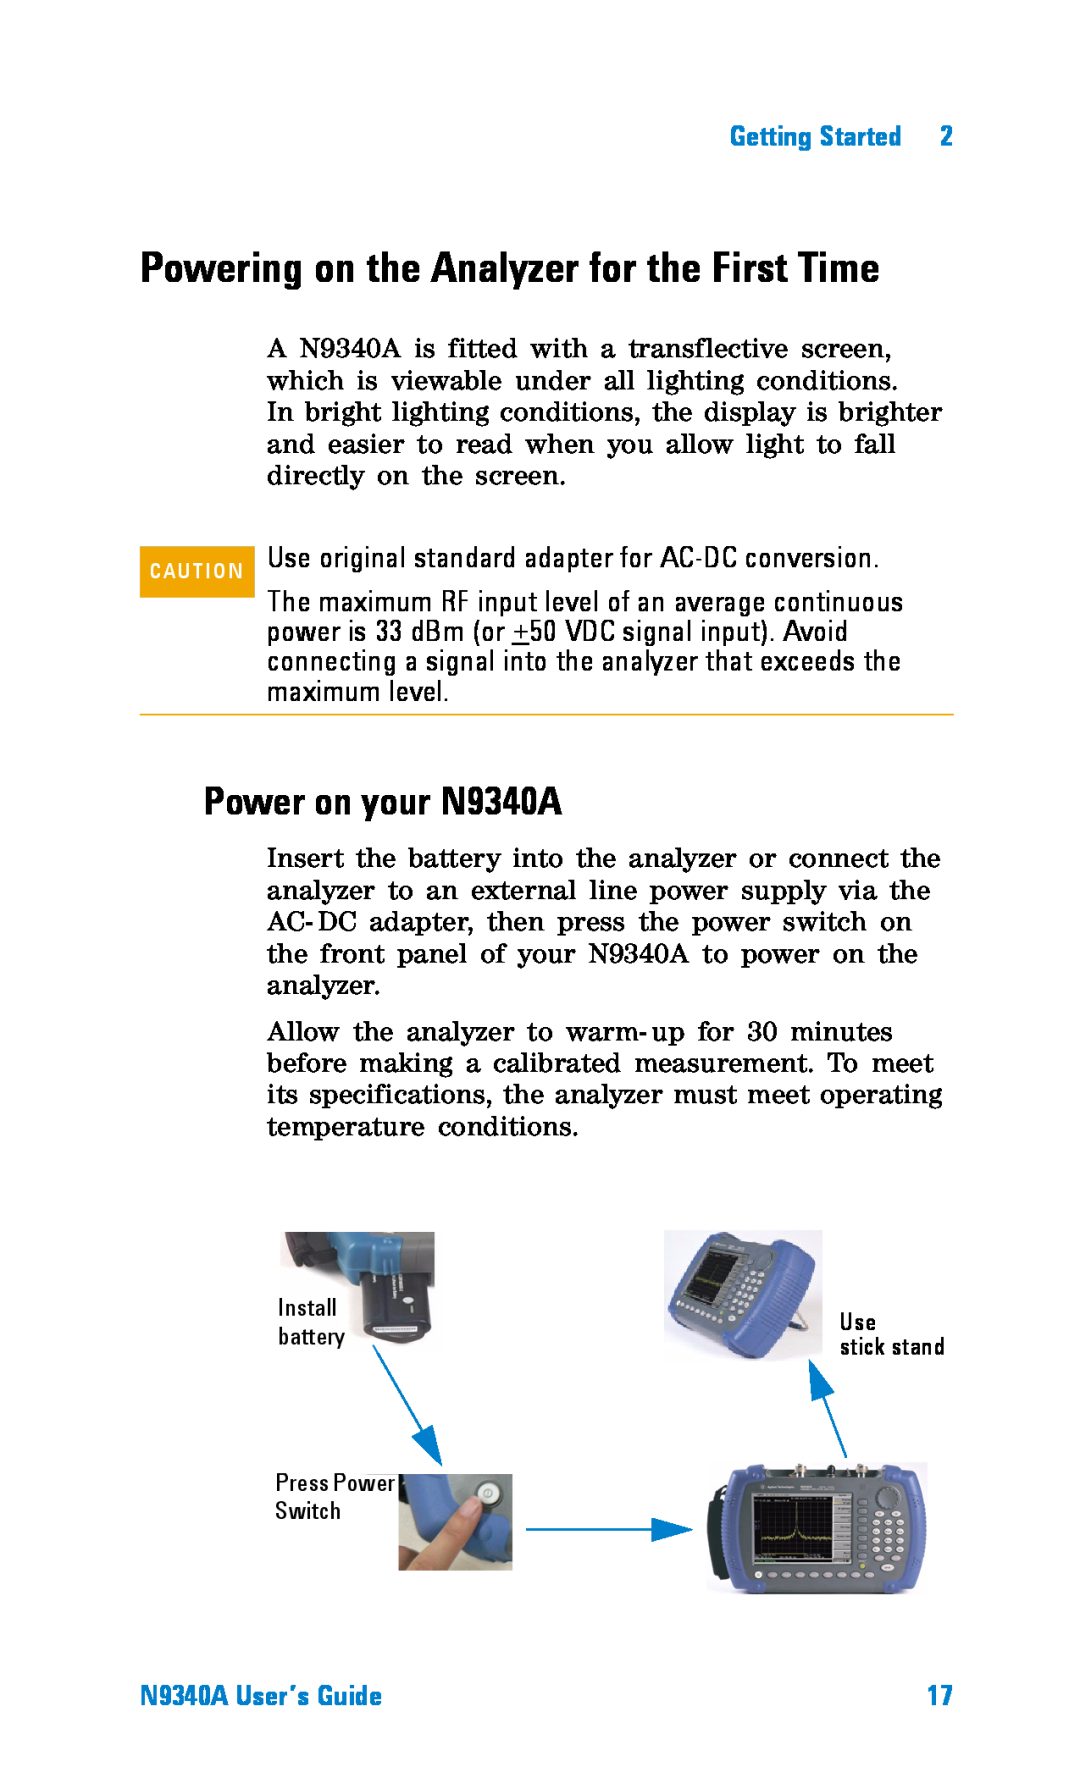 Agilent Technologies manual Powering on the Analyzer for the First Time, Power on your N9340A, N9340A User’s Guide 